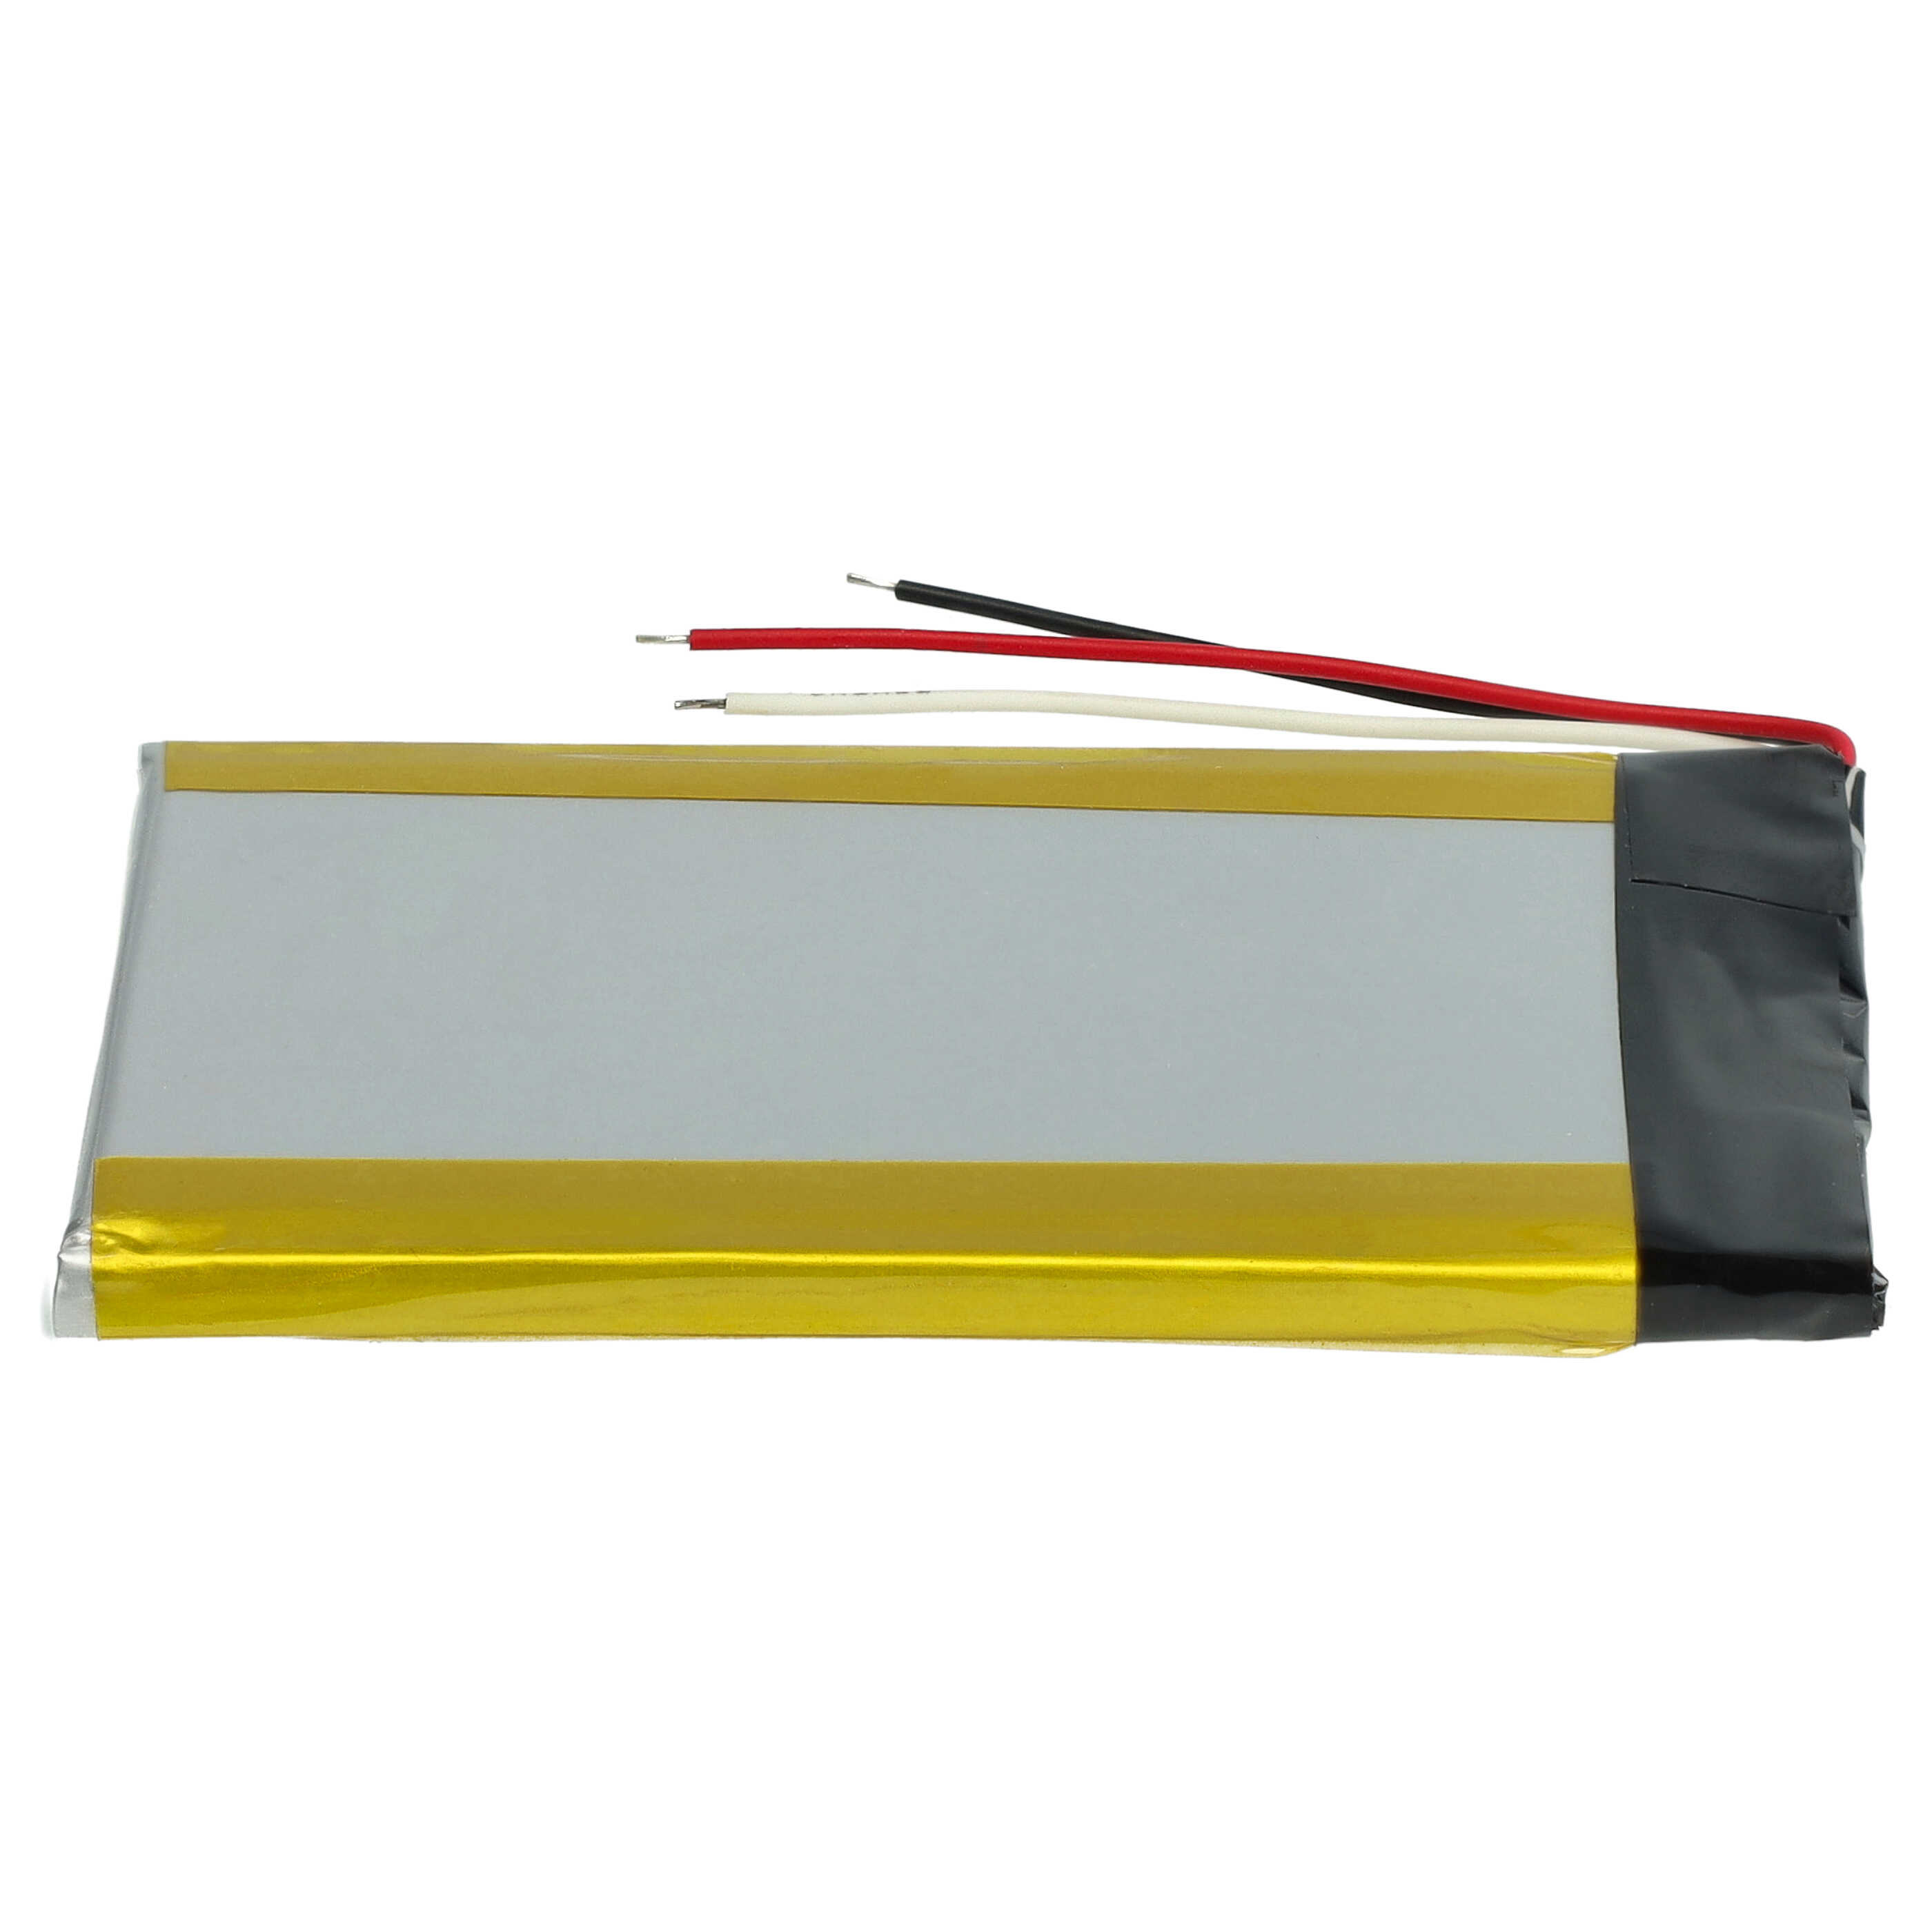 MP3-Player Battery Replacement for Sony US453759 - 1000mAh 3.7V Li-polymer